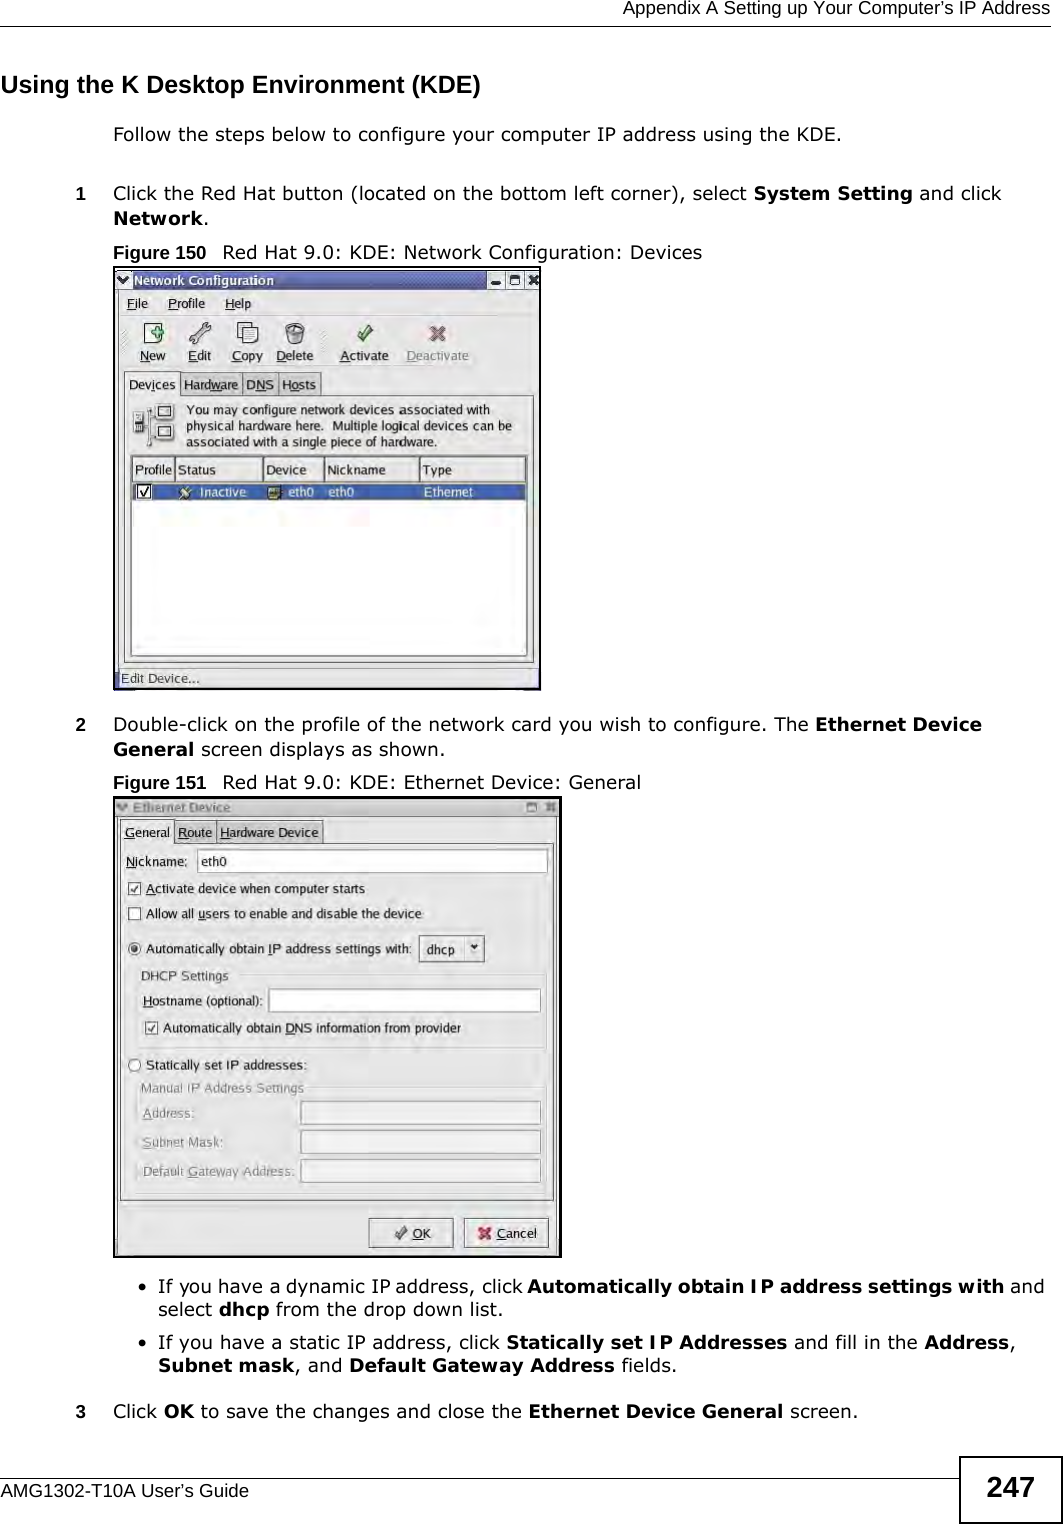  Appendix A Setting up Your Computer’s IP AddressAMG1302-T10A User’s Guide 247Using the K Desktop Environment (KDE)Follow the steps below to configure your computer IP address using the KDE. 1Click the Red Hat button (located on the bottom left corner), select System Setting and click Network.Figure 150   Red Hat 9.0: KDE: Network Configuration: Devices 2Double-click on the profile of the network card you wish to configure. The Ethernet Device General screen displays as shown. Figure 151   Red Hat 9.0: KDE: Ethernet Device: General  • If you have a dynamic IP address, click Automatically obtain IP address settings with and select dhcp from the drop down list. • If you have a static IP address, click Statically set IP Addresses and fill in the Address, Subnet mask, and Default Gateway Address fields. 3Click OK to save the changes and close the Ethernet Device General screen. 